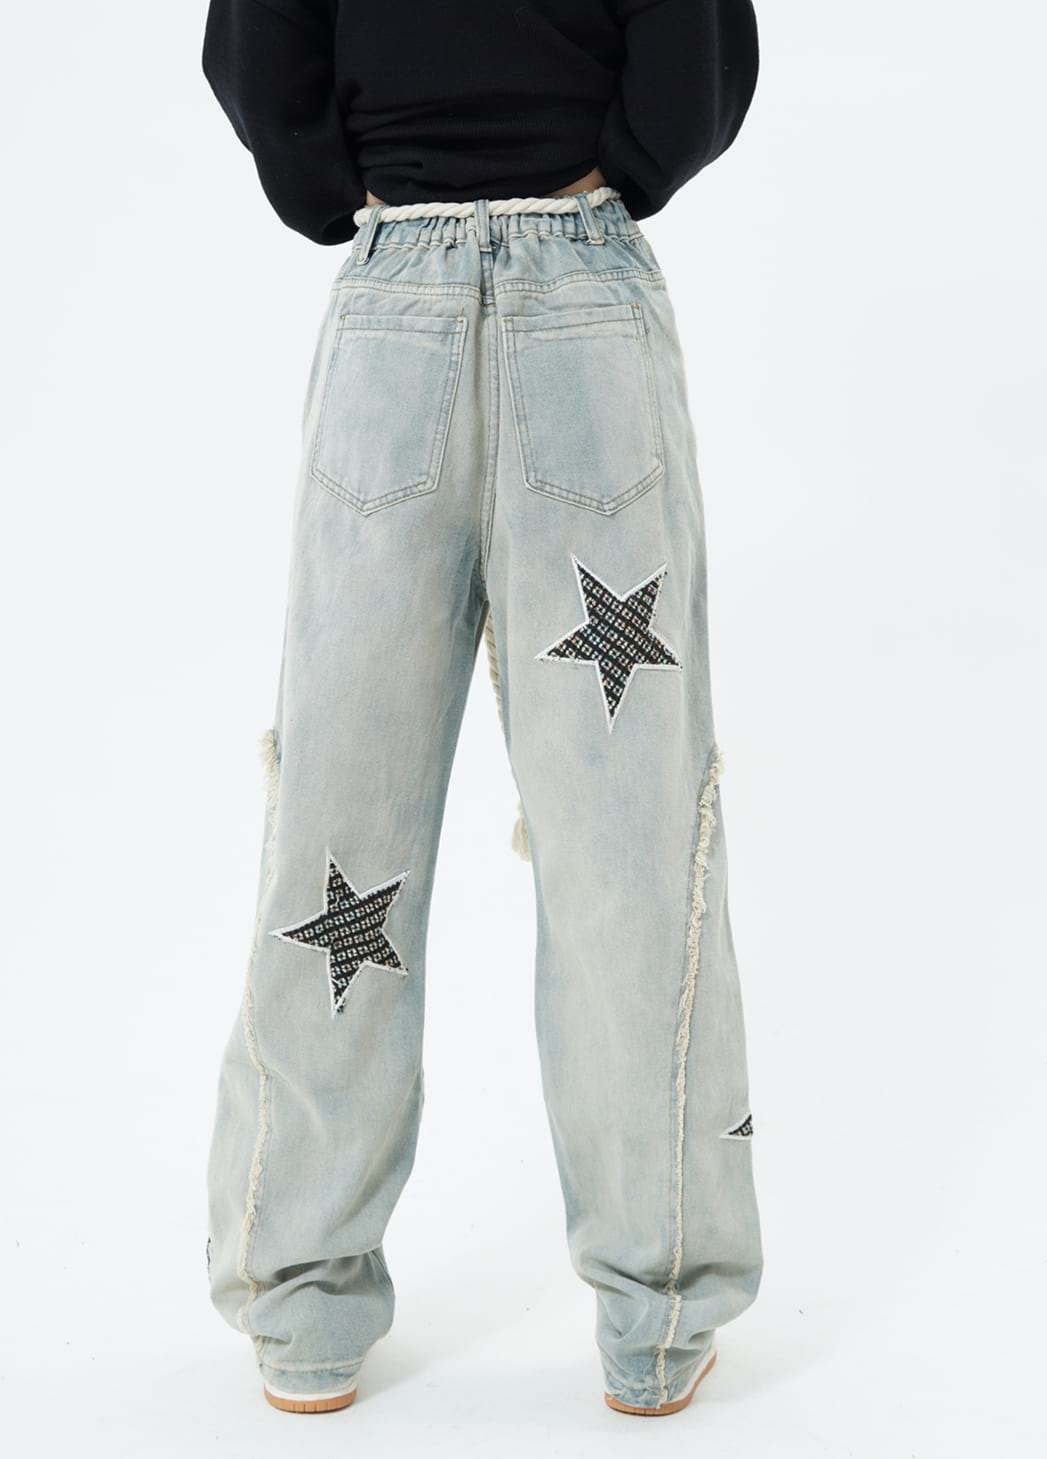 Distressed Patchwork Star Jeans